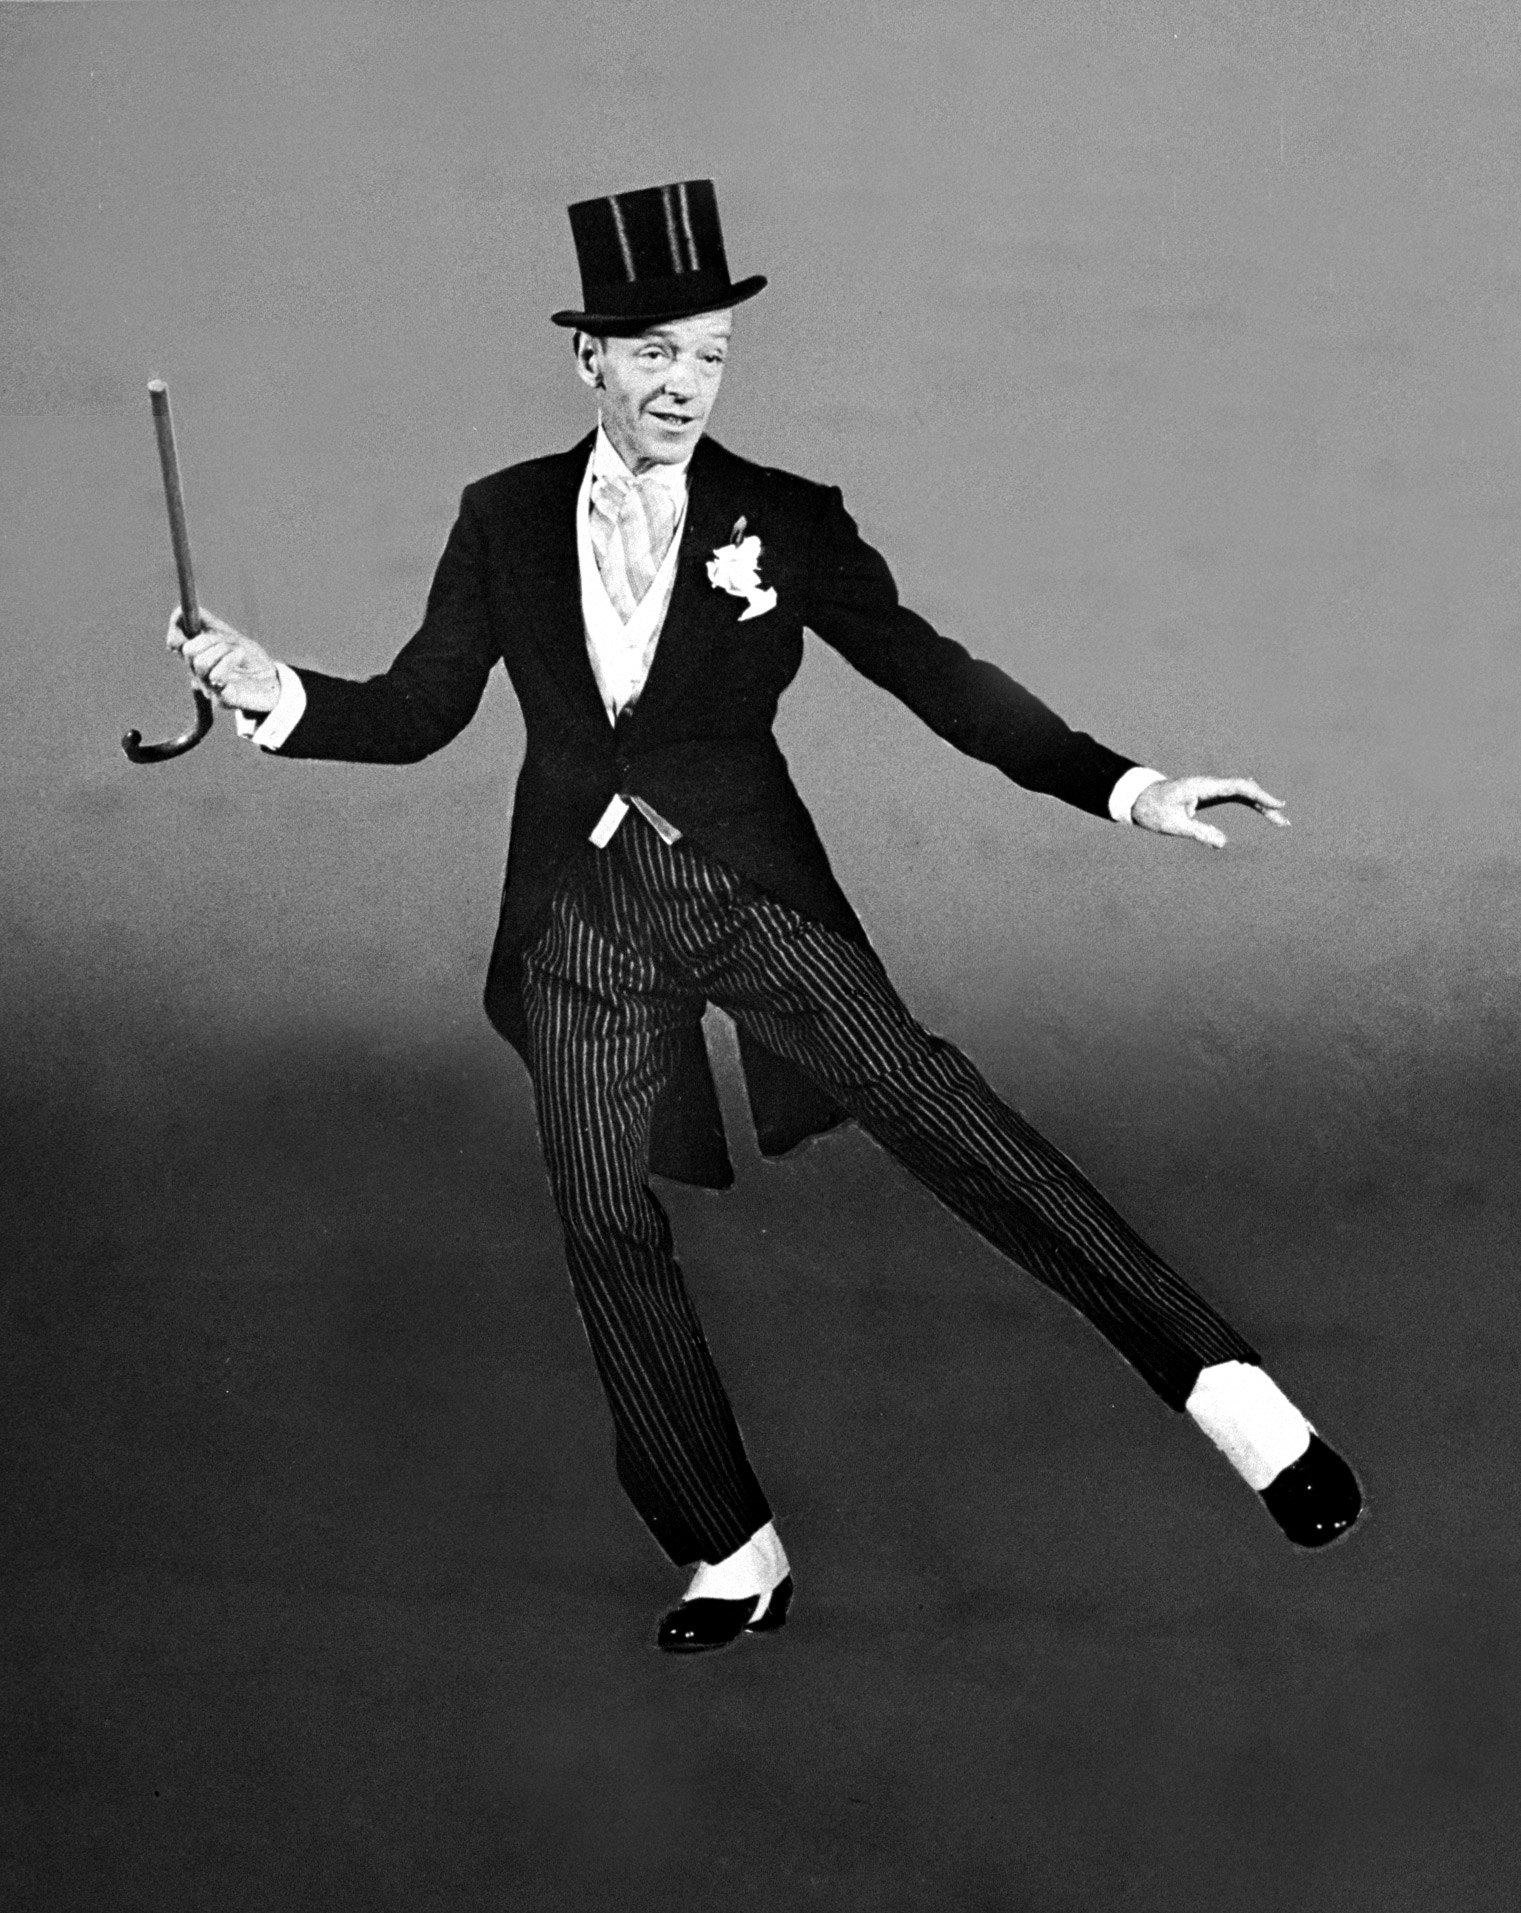 Dancer Fred Astaire clad in top hat, tails and spats, twirling cane in one hand as he dances "Puttin' on the Ritz" number for the movie "Blue Skies.".